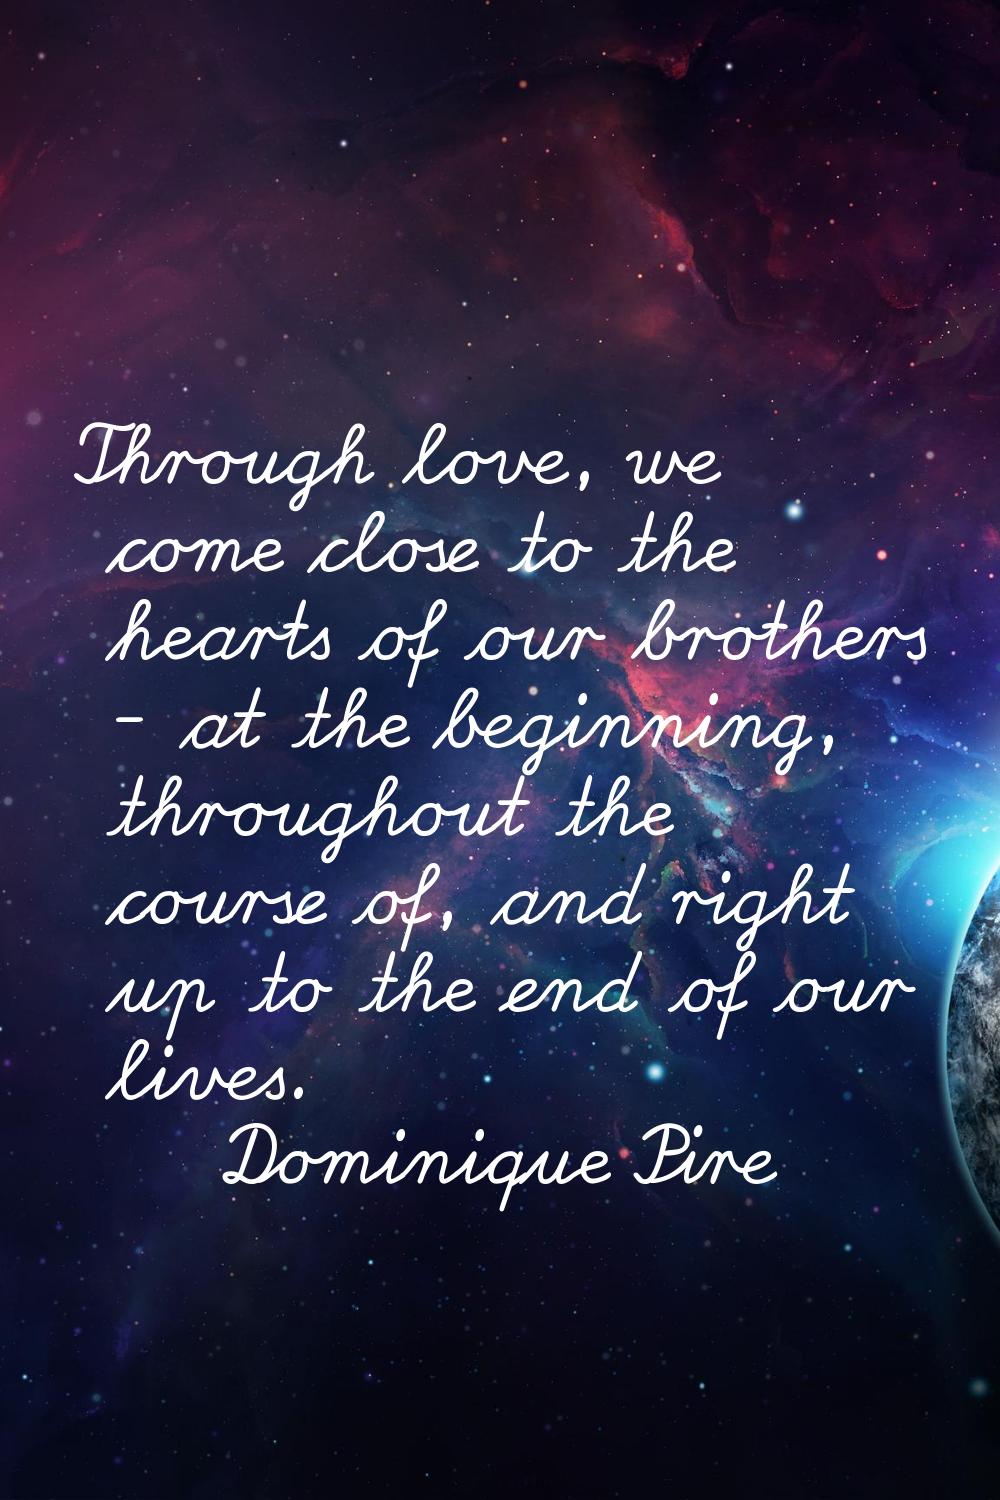 Through love, we come close to the hearts of our brothers - at the beginning, throughout the course